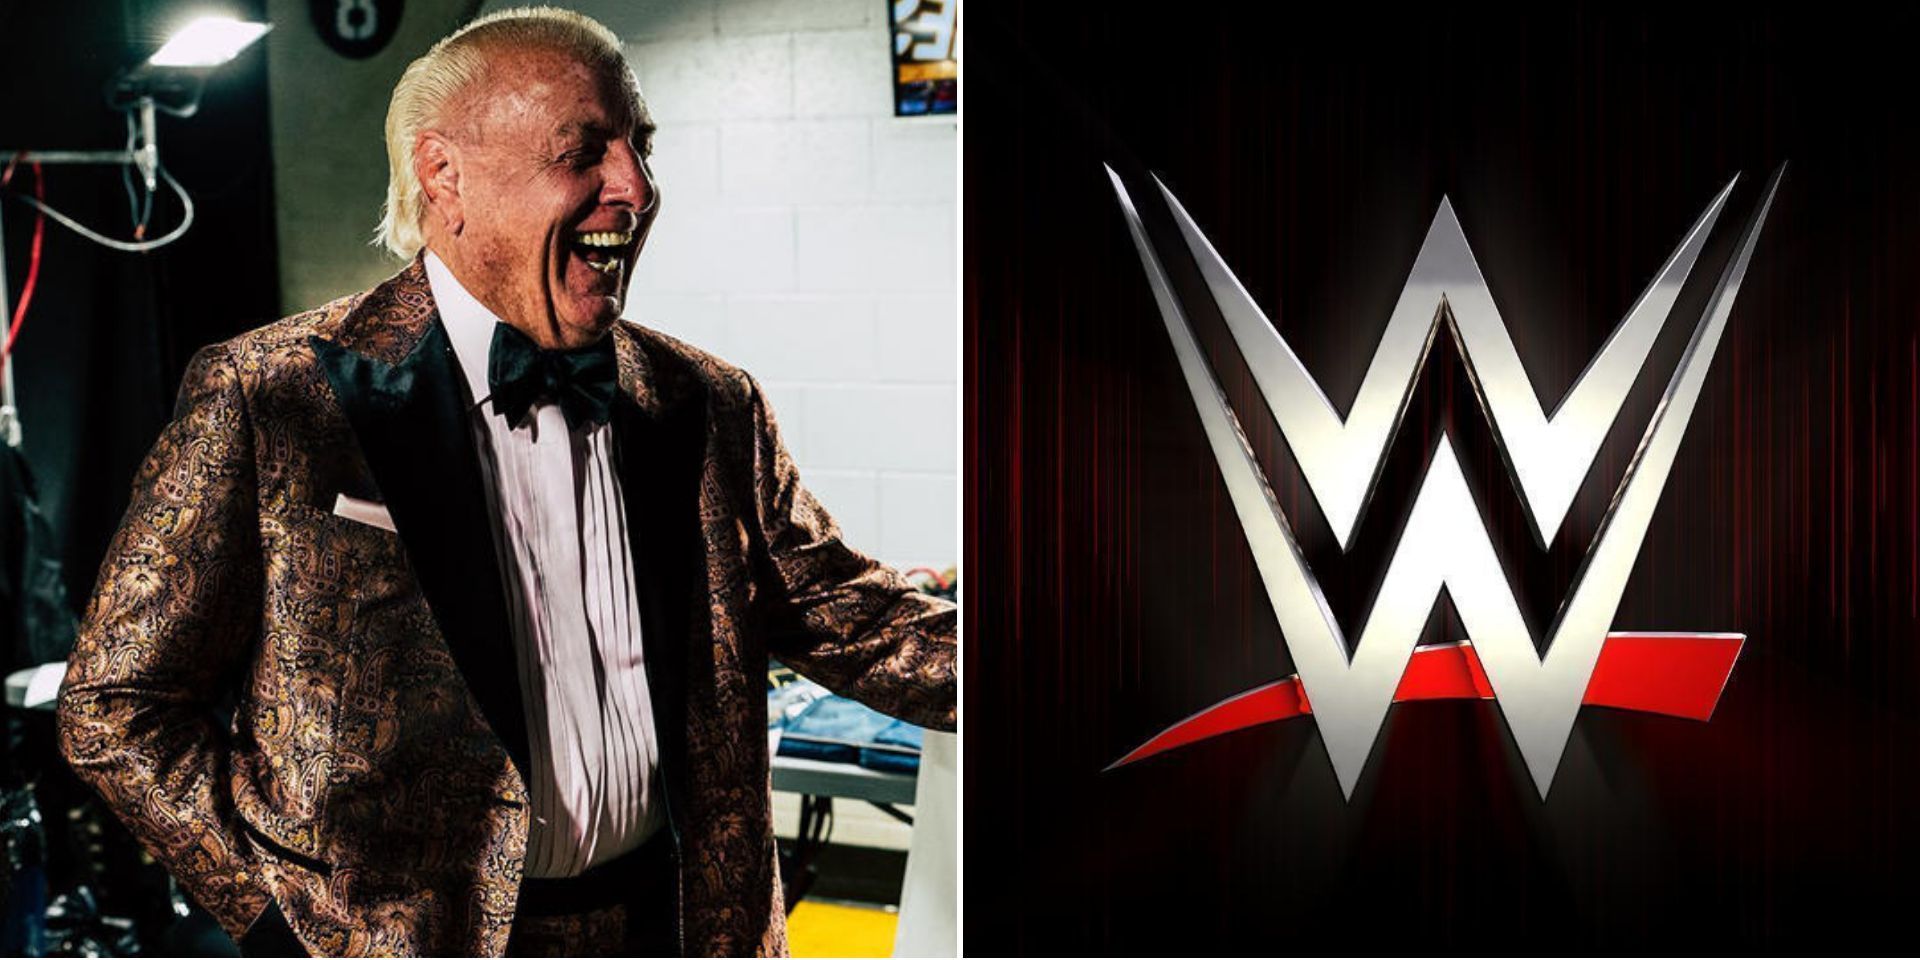 Ric Flair is a two-time WWE Hall of Fame